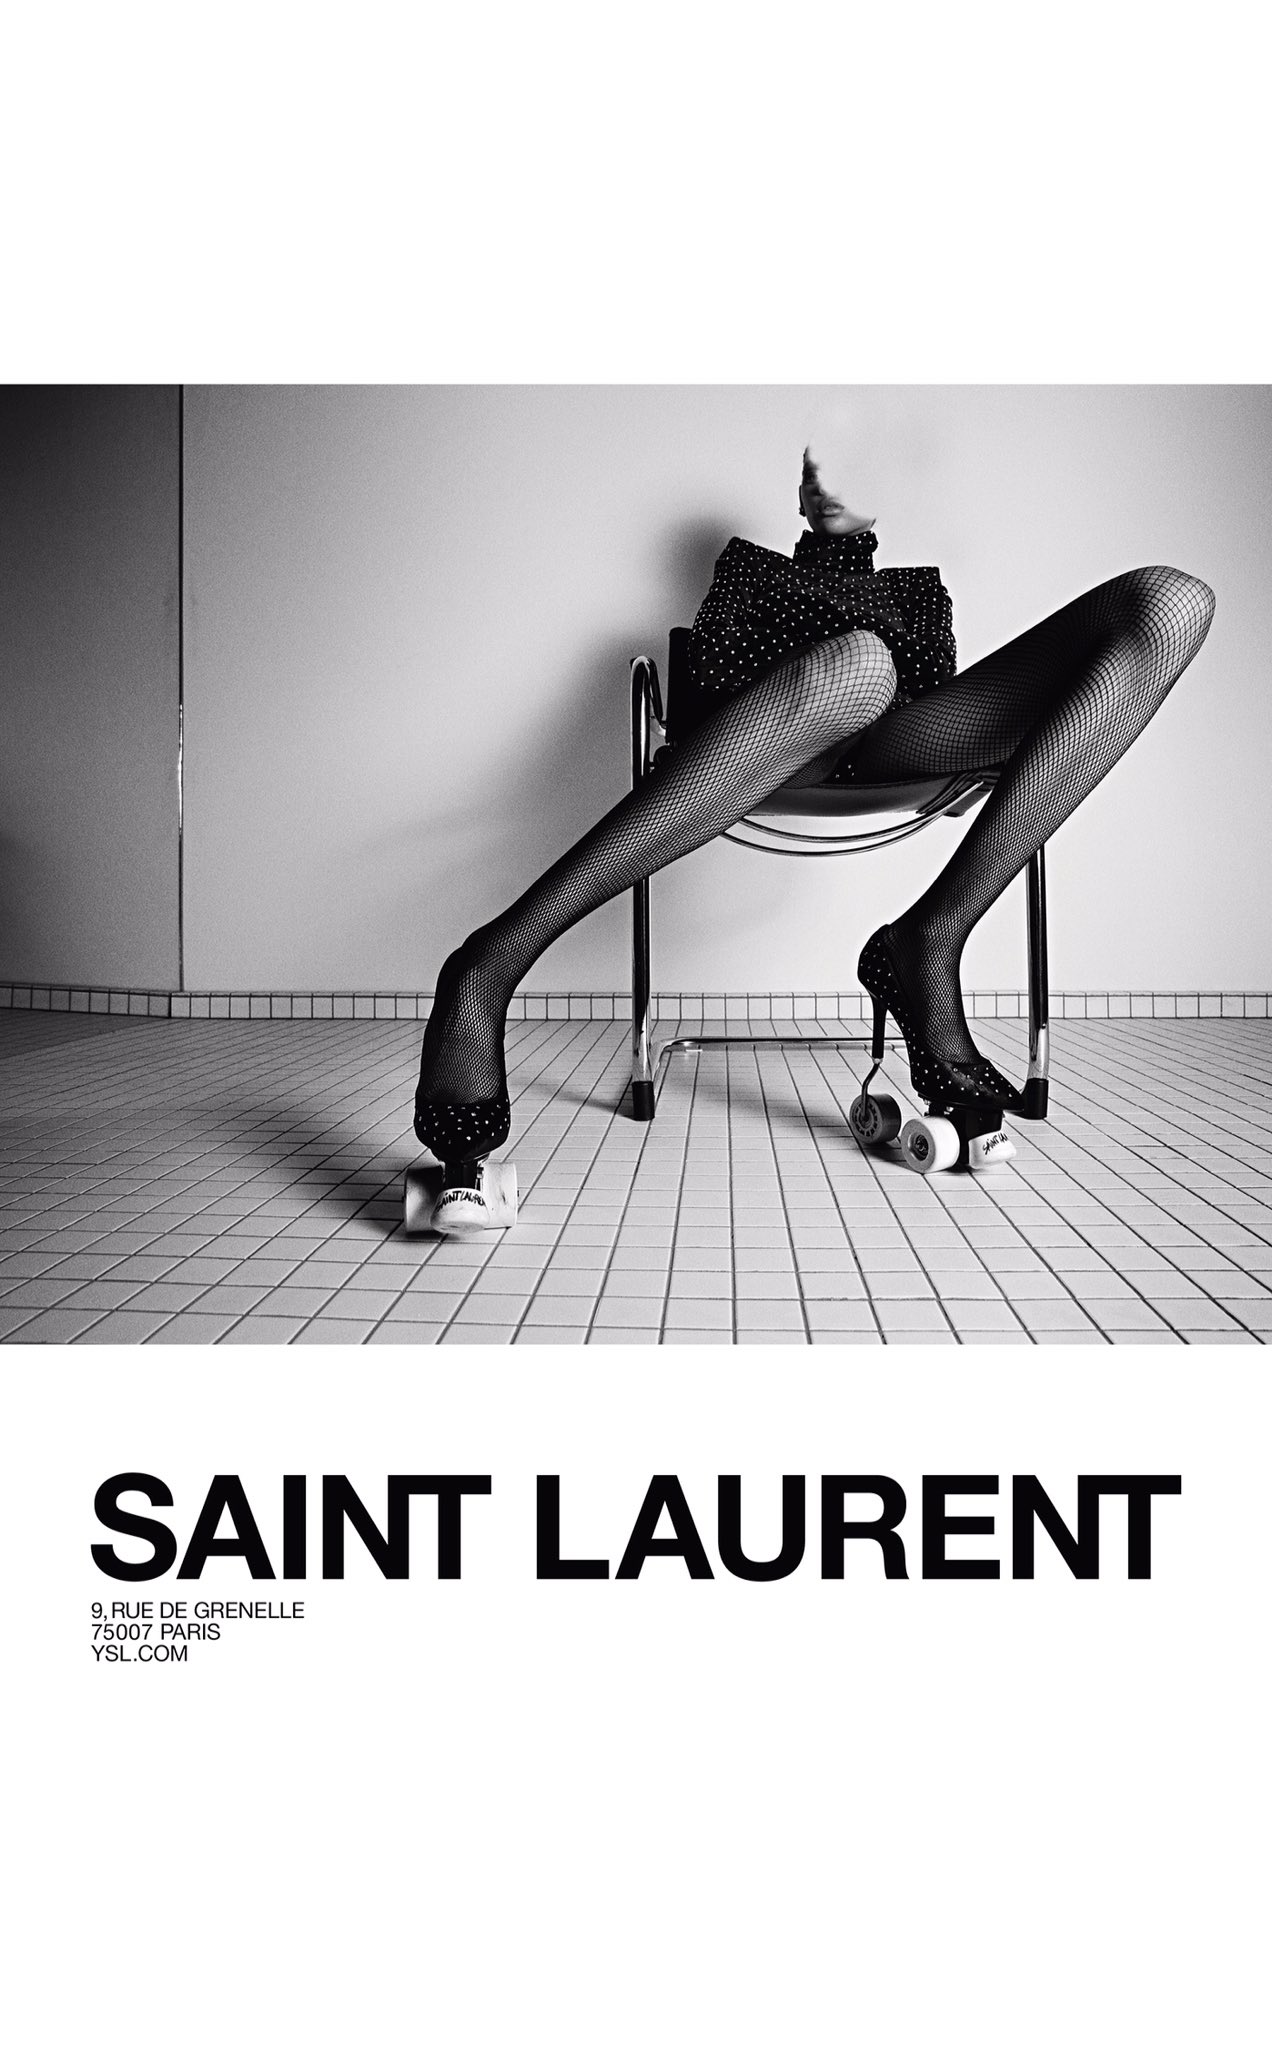 SAINT LAURENT on Twitter: "HIANDRA – FALL 17 IDOL PREVIEW – #YSL06 BY @anthonyvaccarello PHOTOGRAPHED BY @inezandvinoodh #YSL #SaintLaurent #YvesSaintLaurent https://t.co/ir1ai6wWbU" Twitter